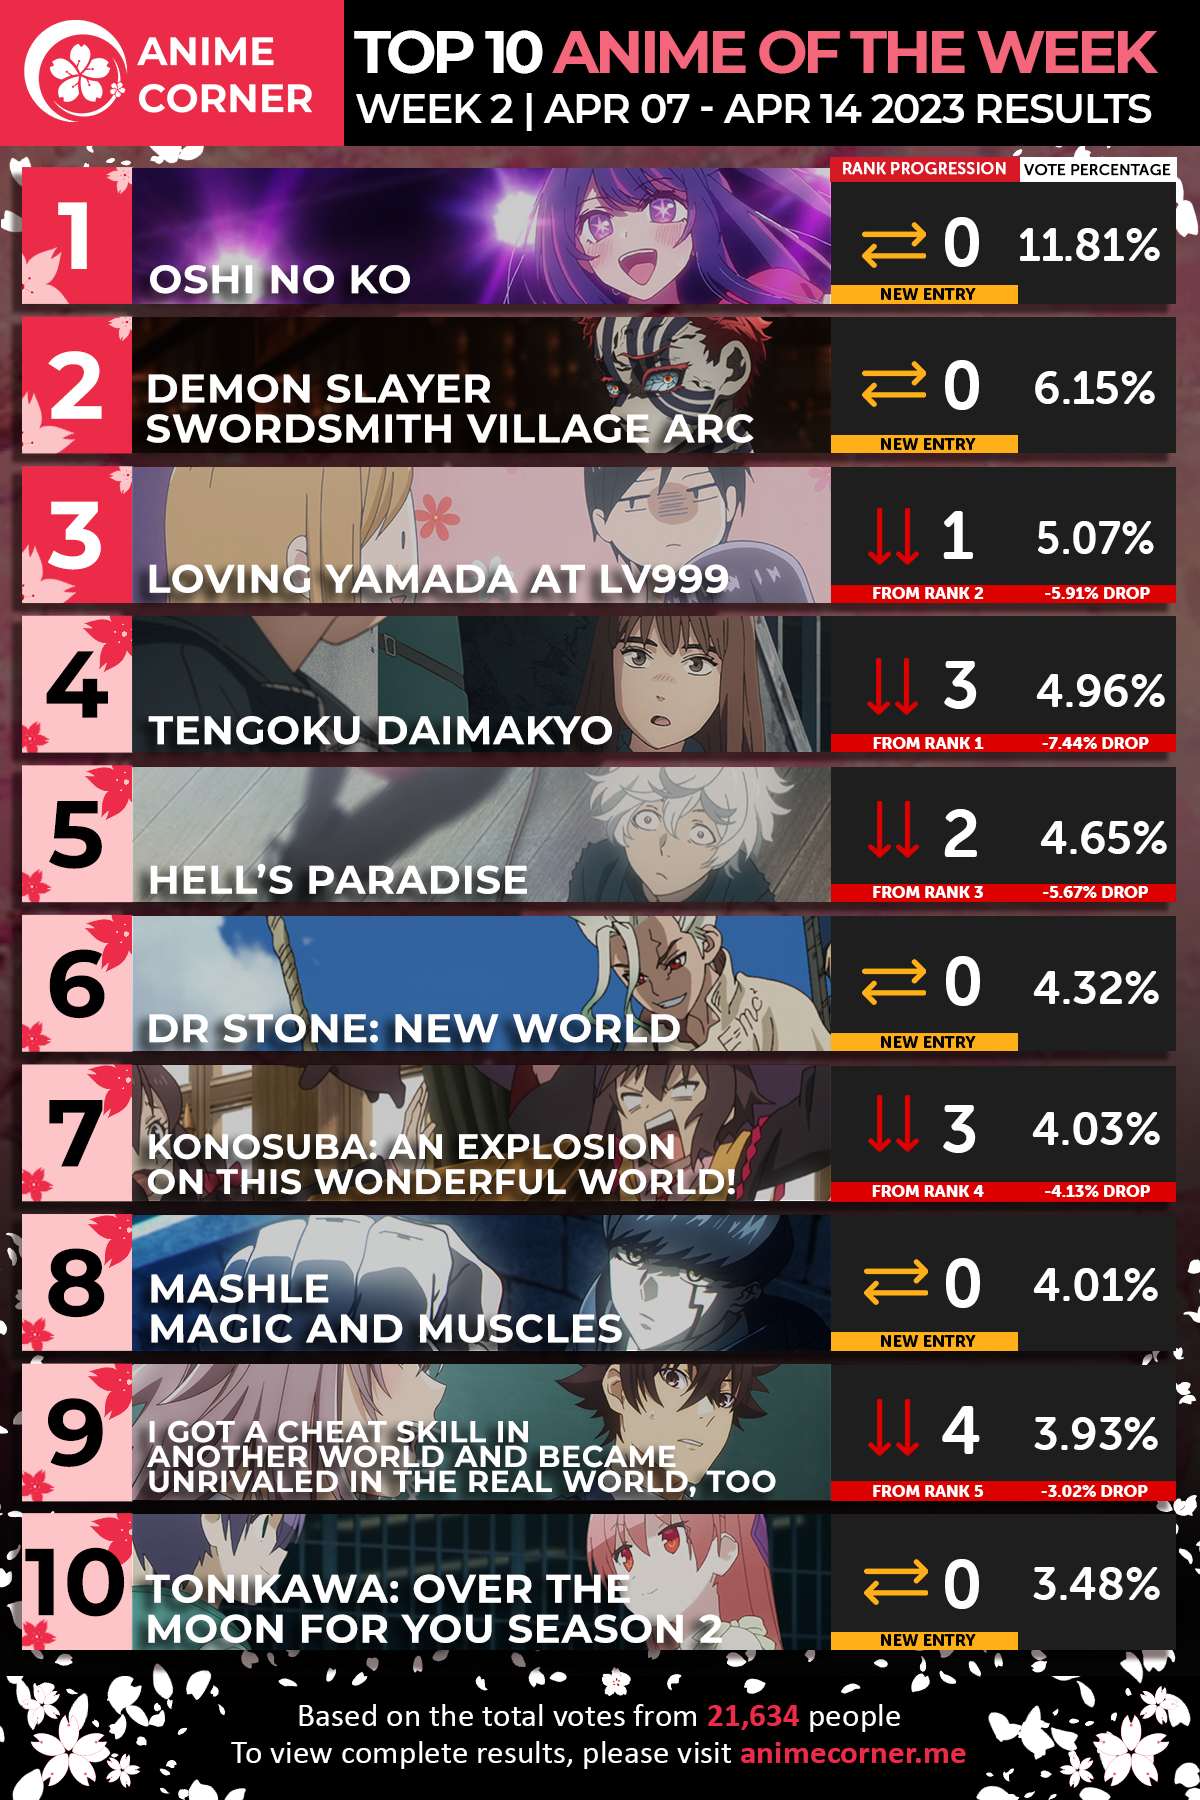 The 5 Best Anime Series, as Voted by IGN Fans - Power Ranking Episode 8